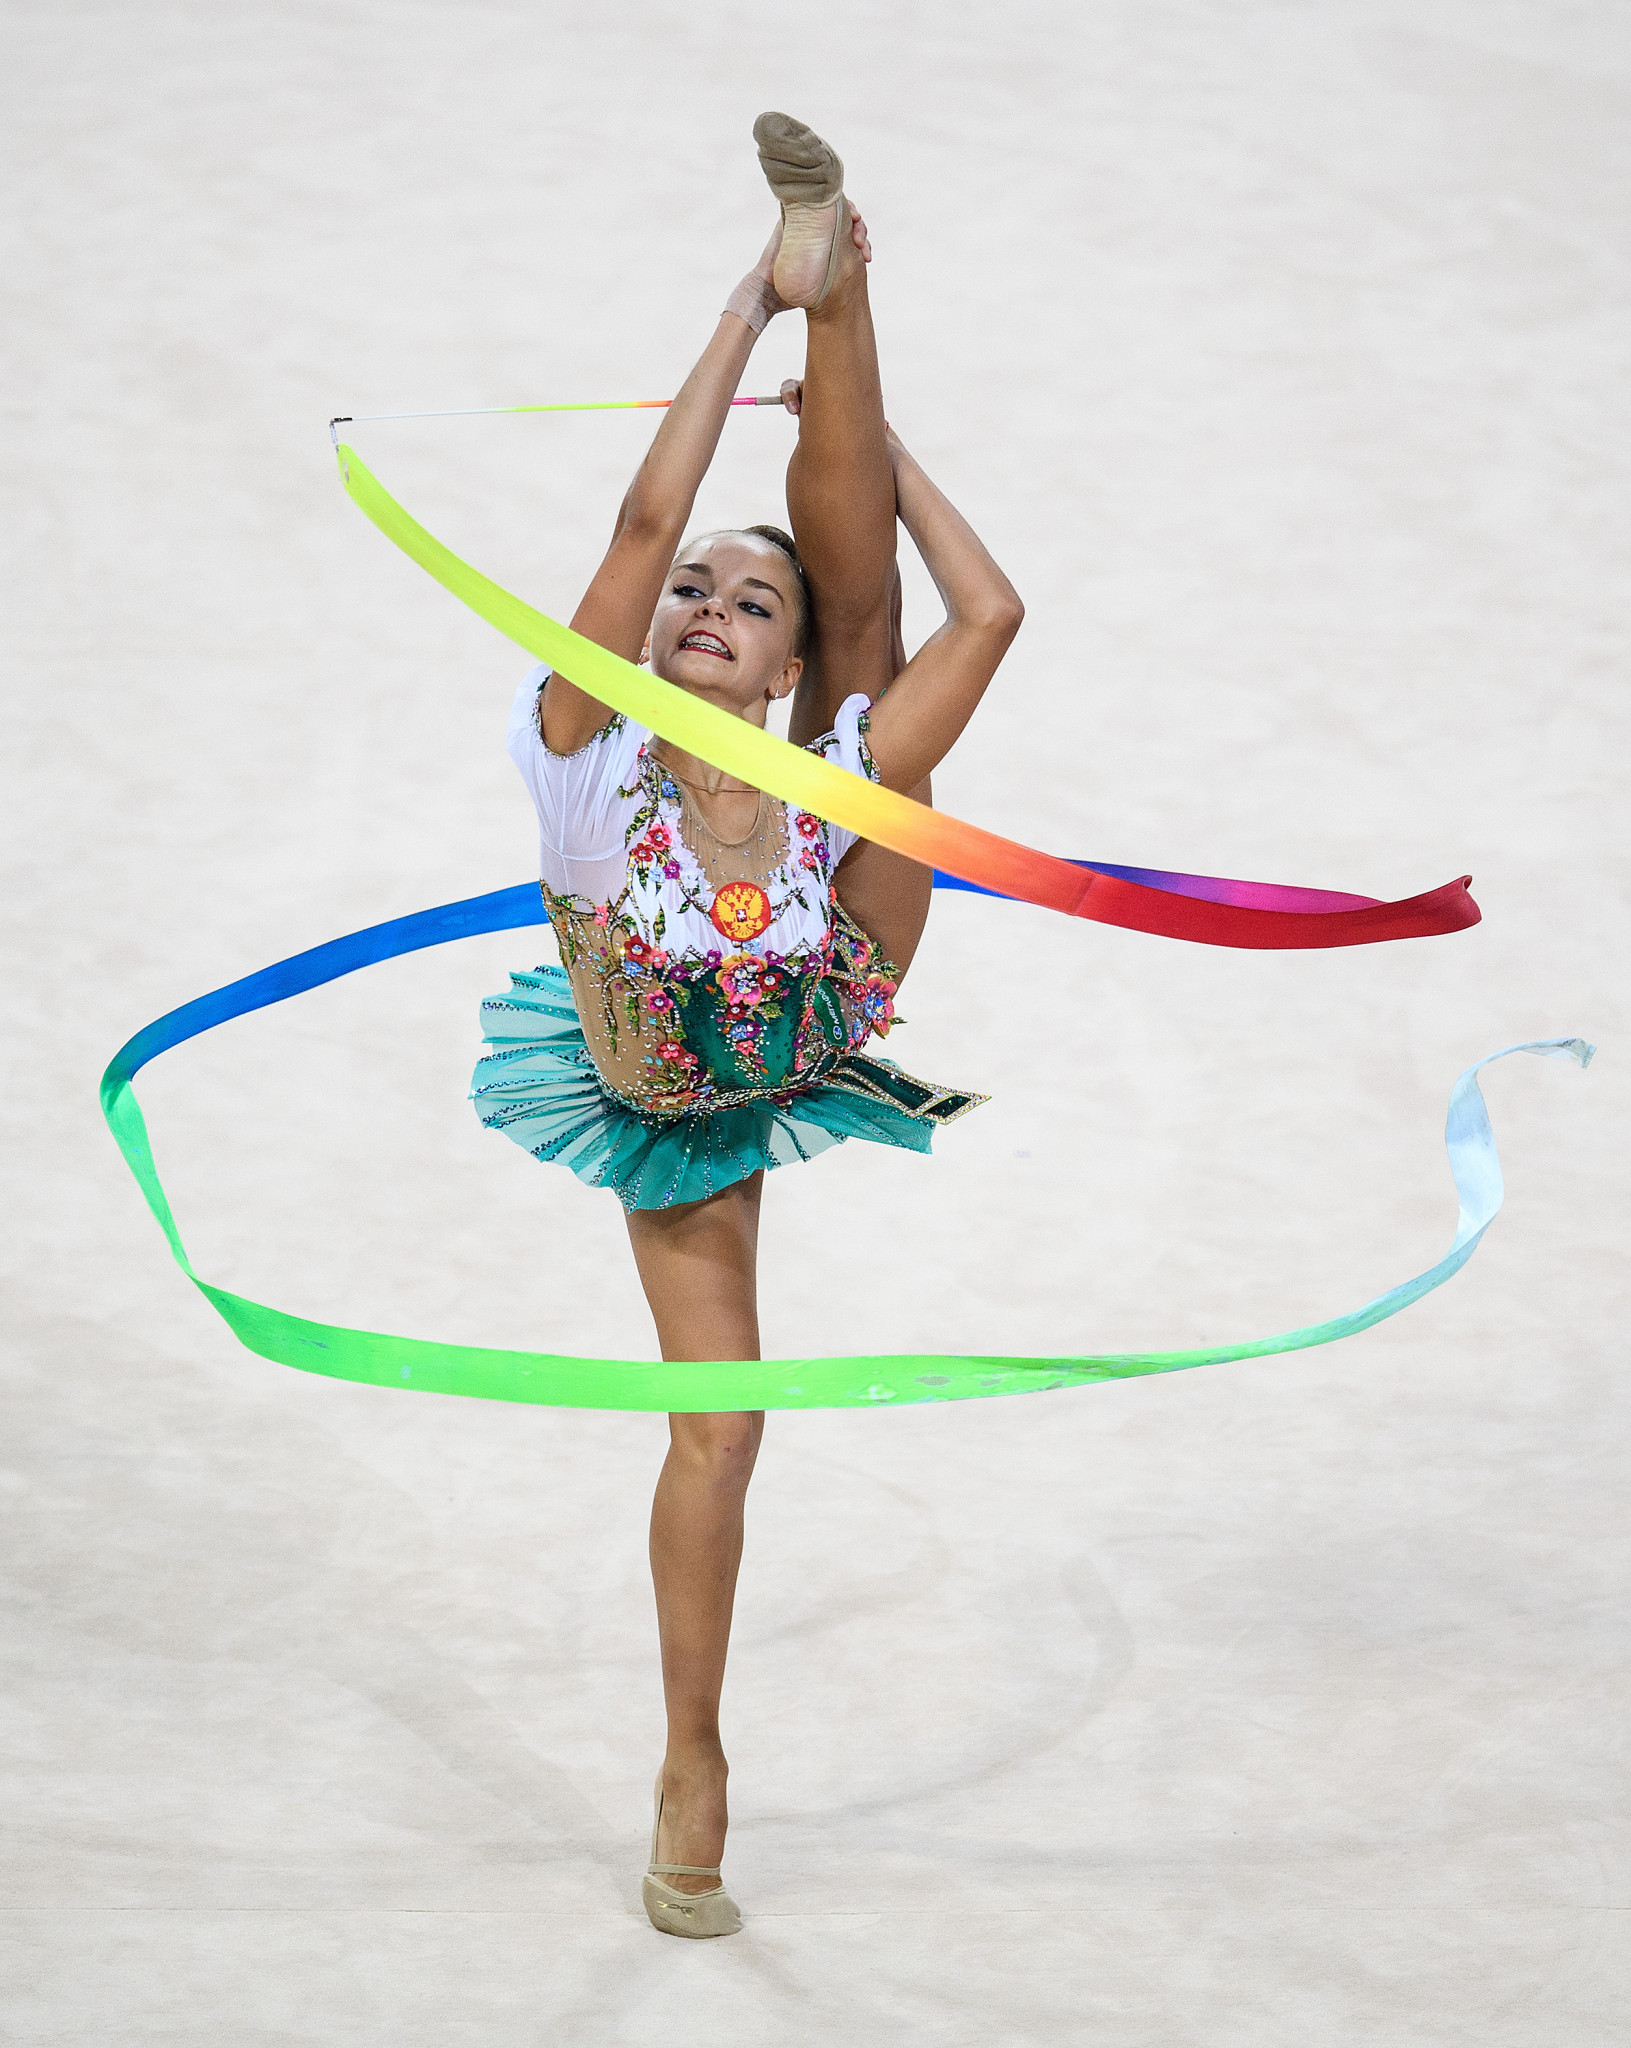 Arina Averina is now the ribbon world champion ©Getty Images